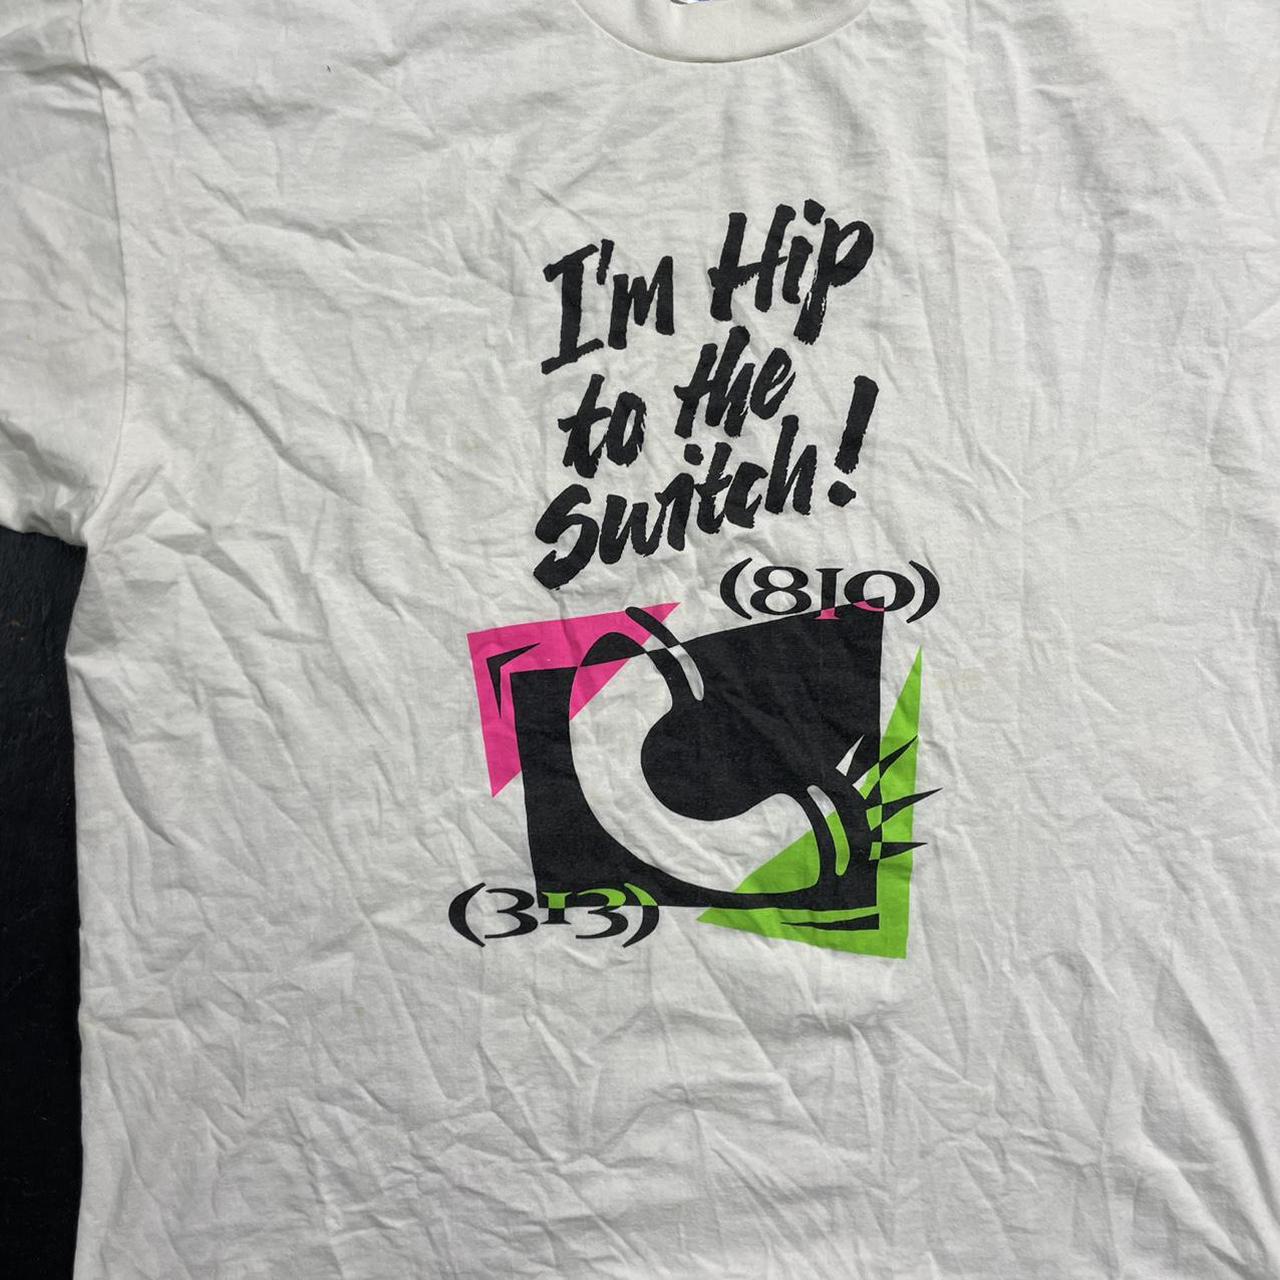 Product Image 3 - Vintage 90s "I'm Hip to